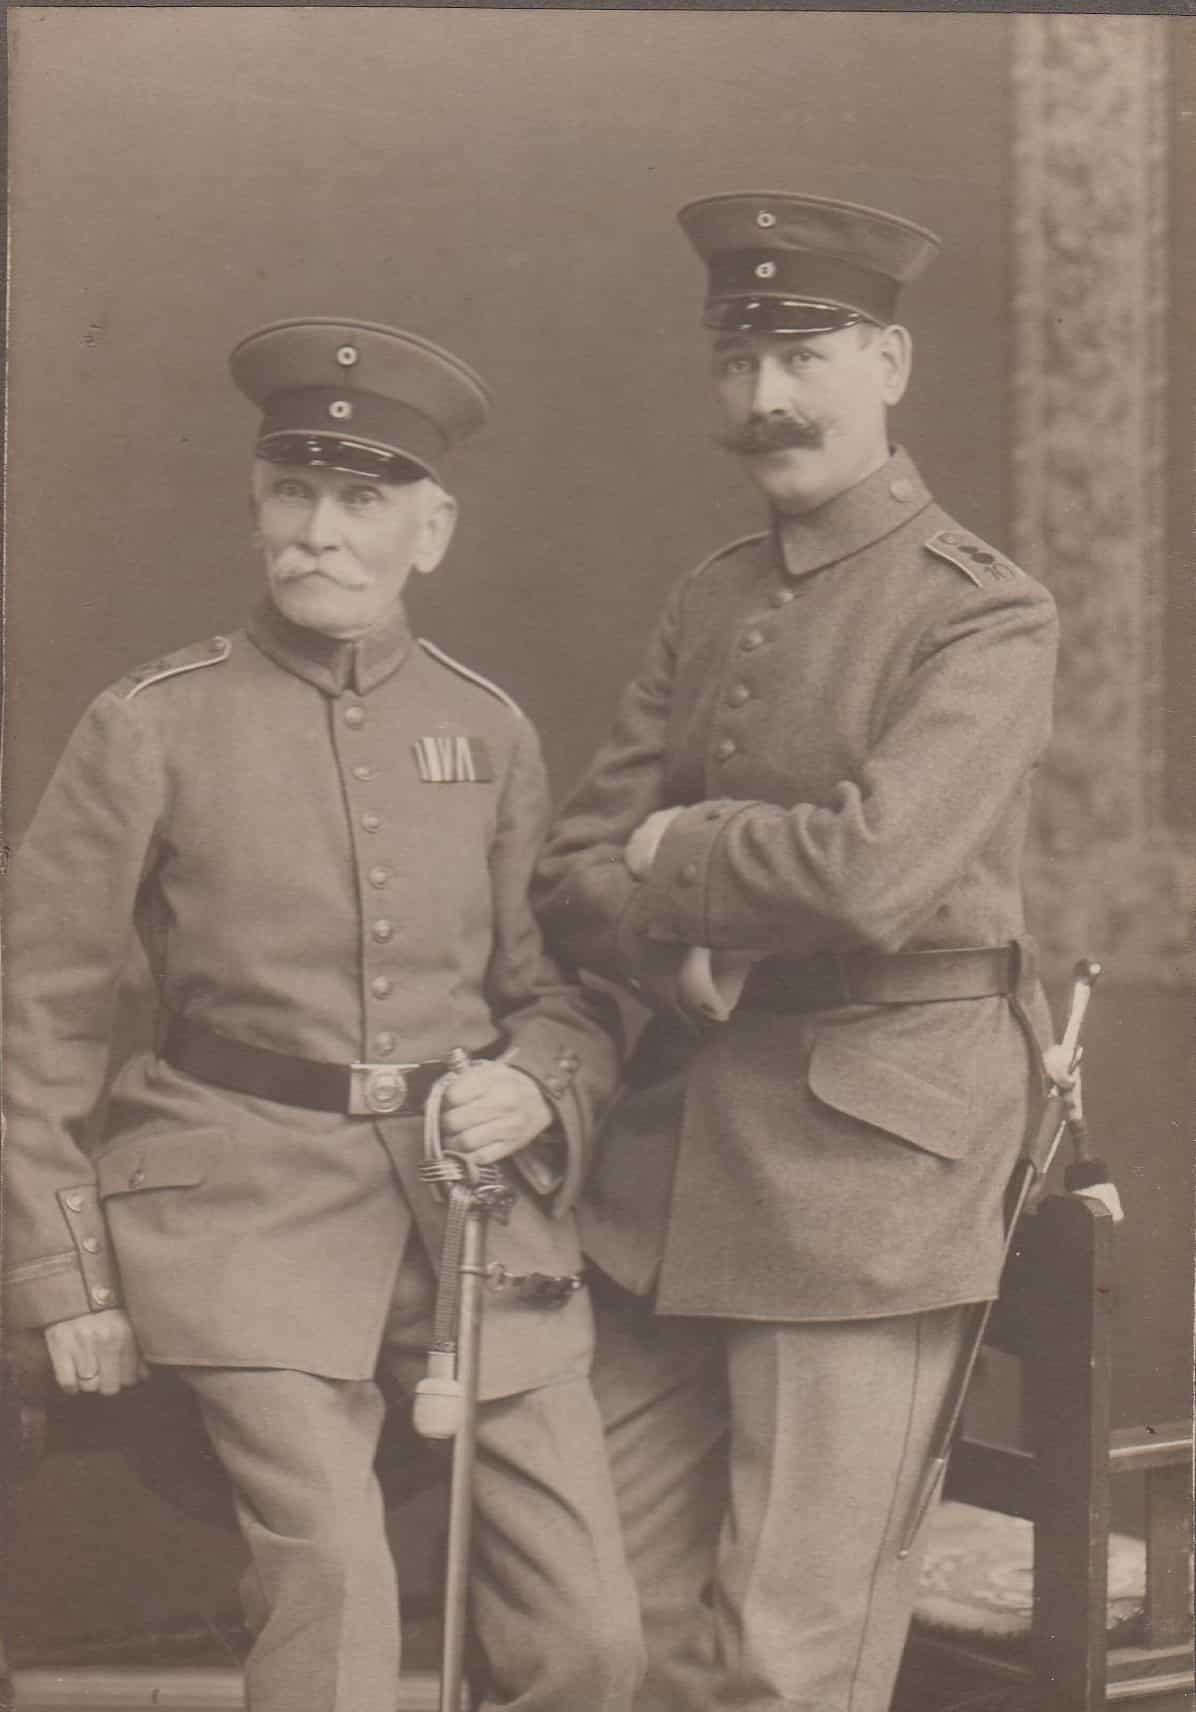 My great-grandfather Hermann Hartmann (left) and great-uncle Franz Hartmann, Hermann’s older brother, circa 1915. Photo improved by MyHeritage.